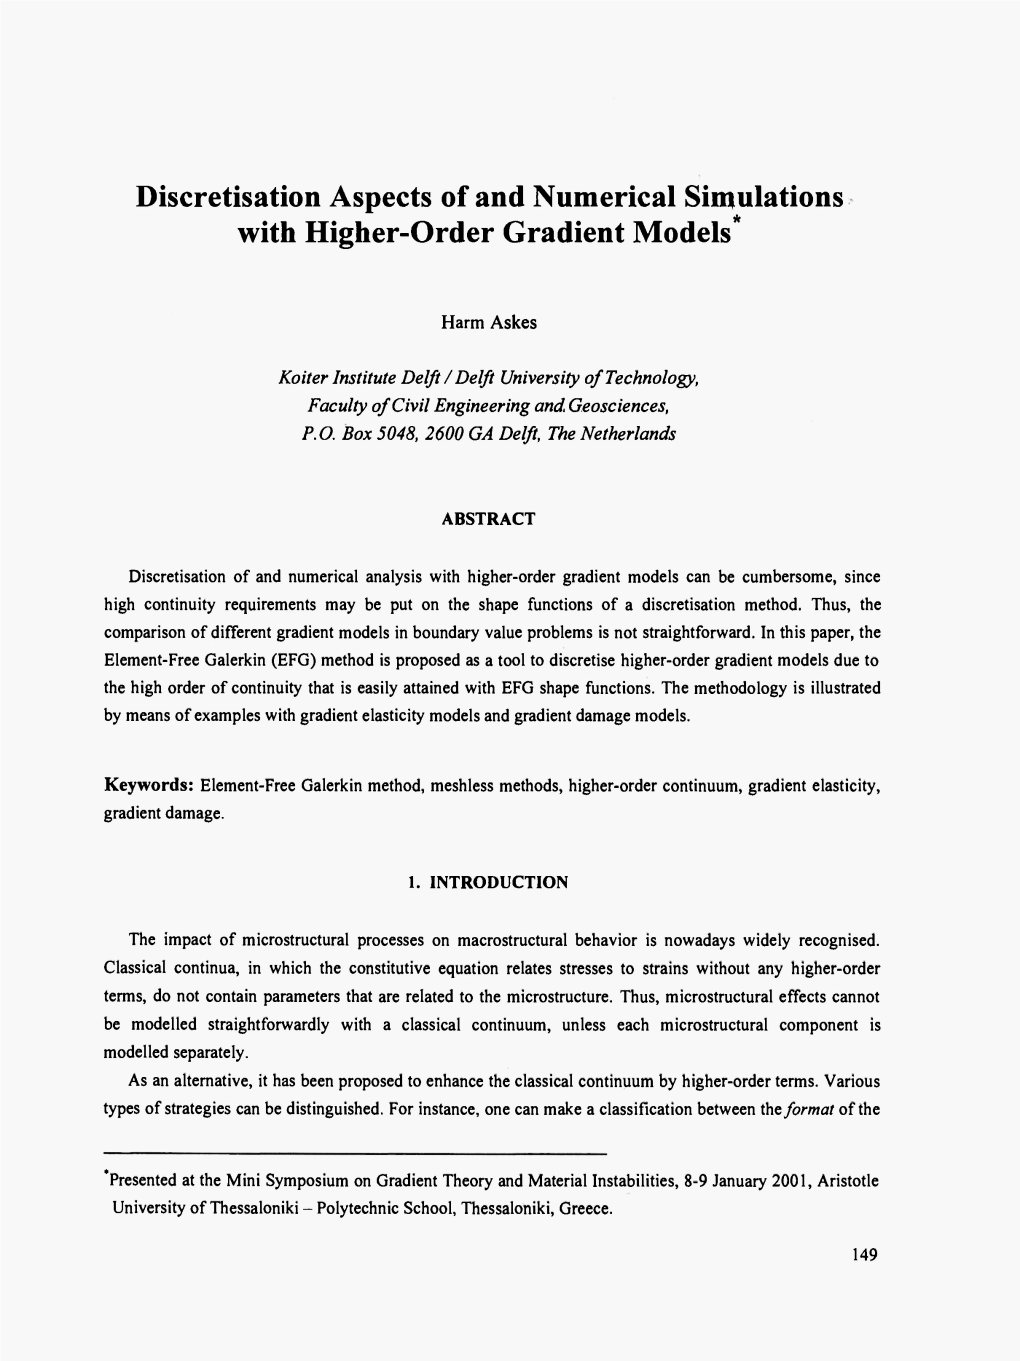 Discretisation Aspects of and Numerical Simulations with Higher-Order Gradient Models*